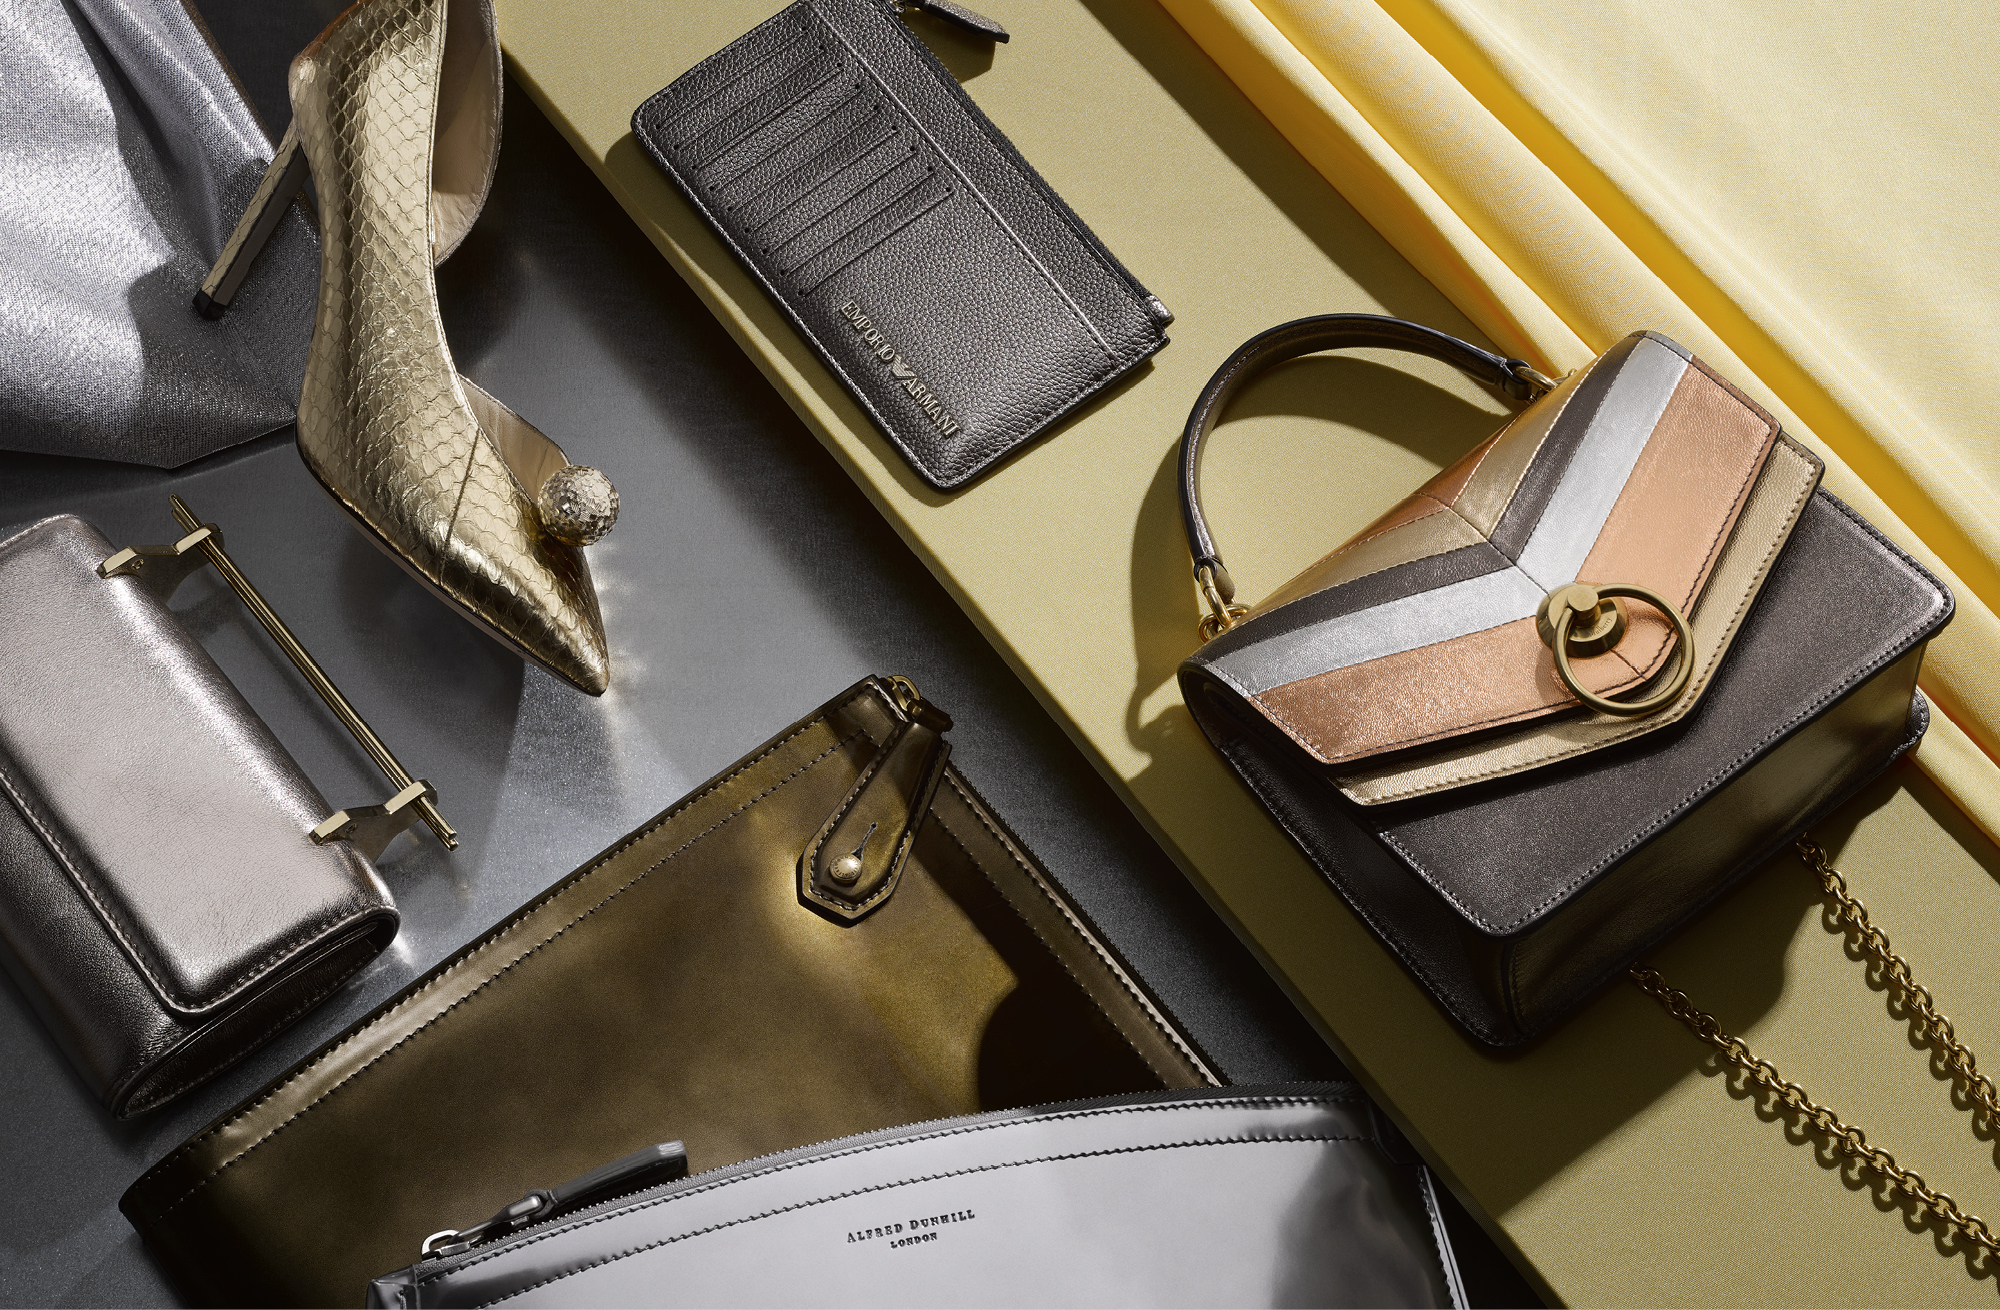 Clockwise from top left: Sadira 100 shoe, £850, JIMMY CHOO; card holder, £115, EMPORIO ARMANI; small satchel, £650, MULBERRY; brass folio, £775, and chrome folio, both DUNHILL; mini bag, £960, M2MALLETIER